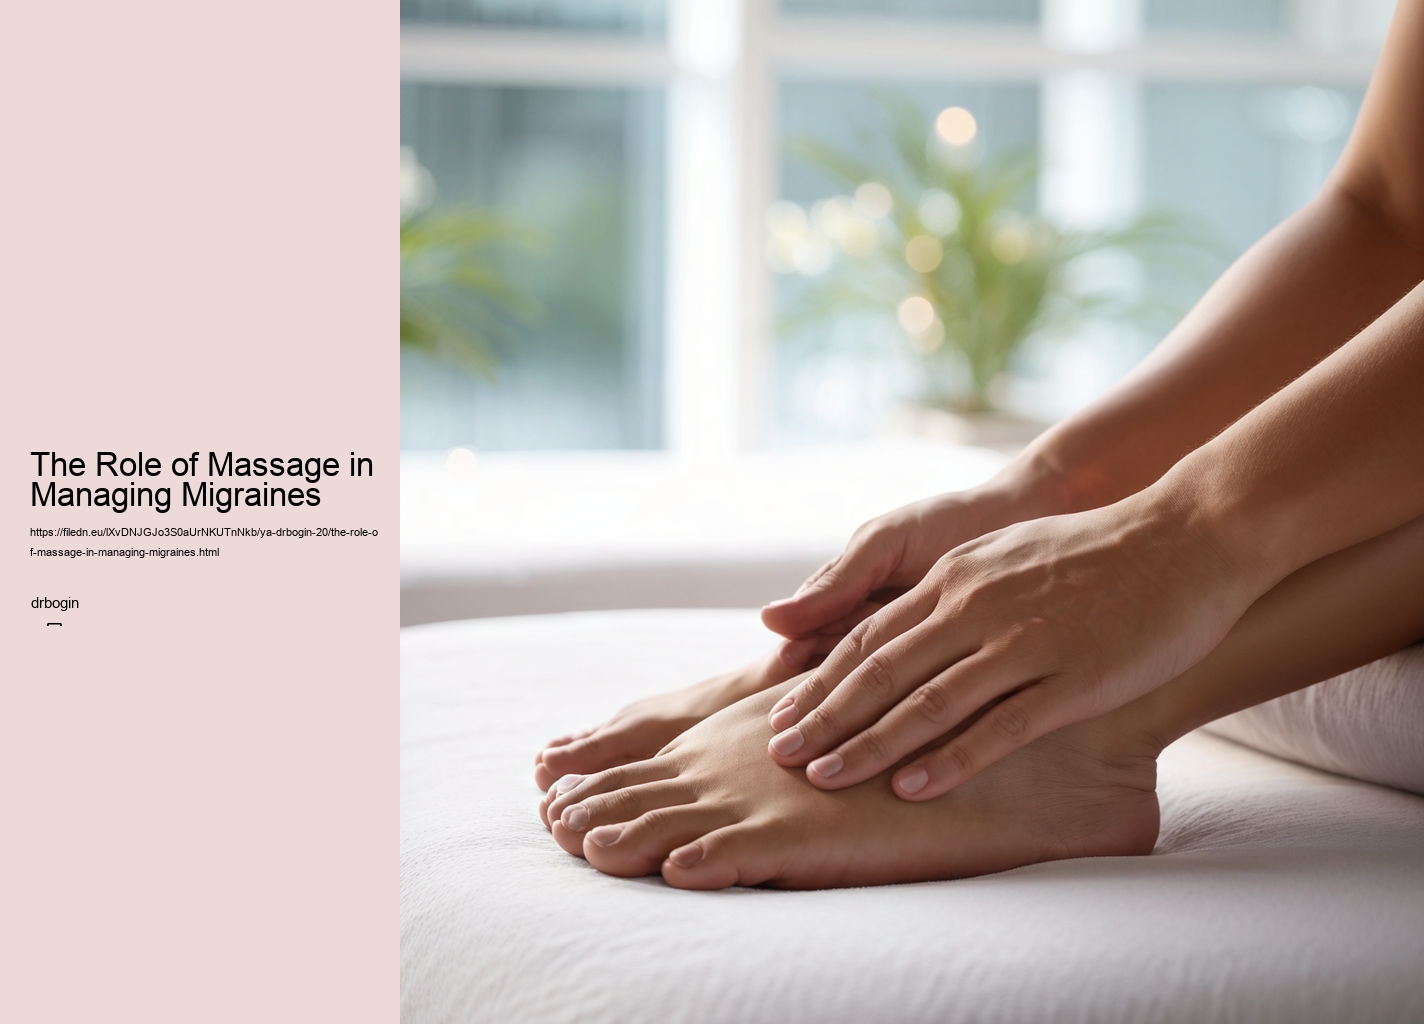 The Role of Massage in Managing Migraines